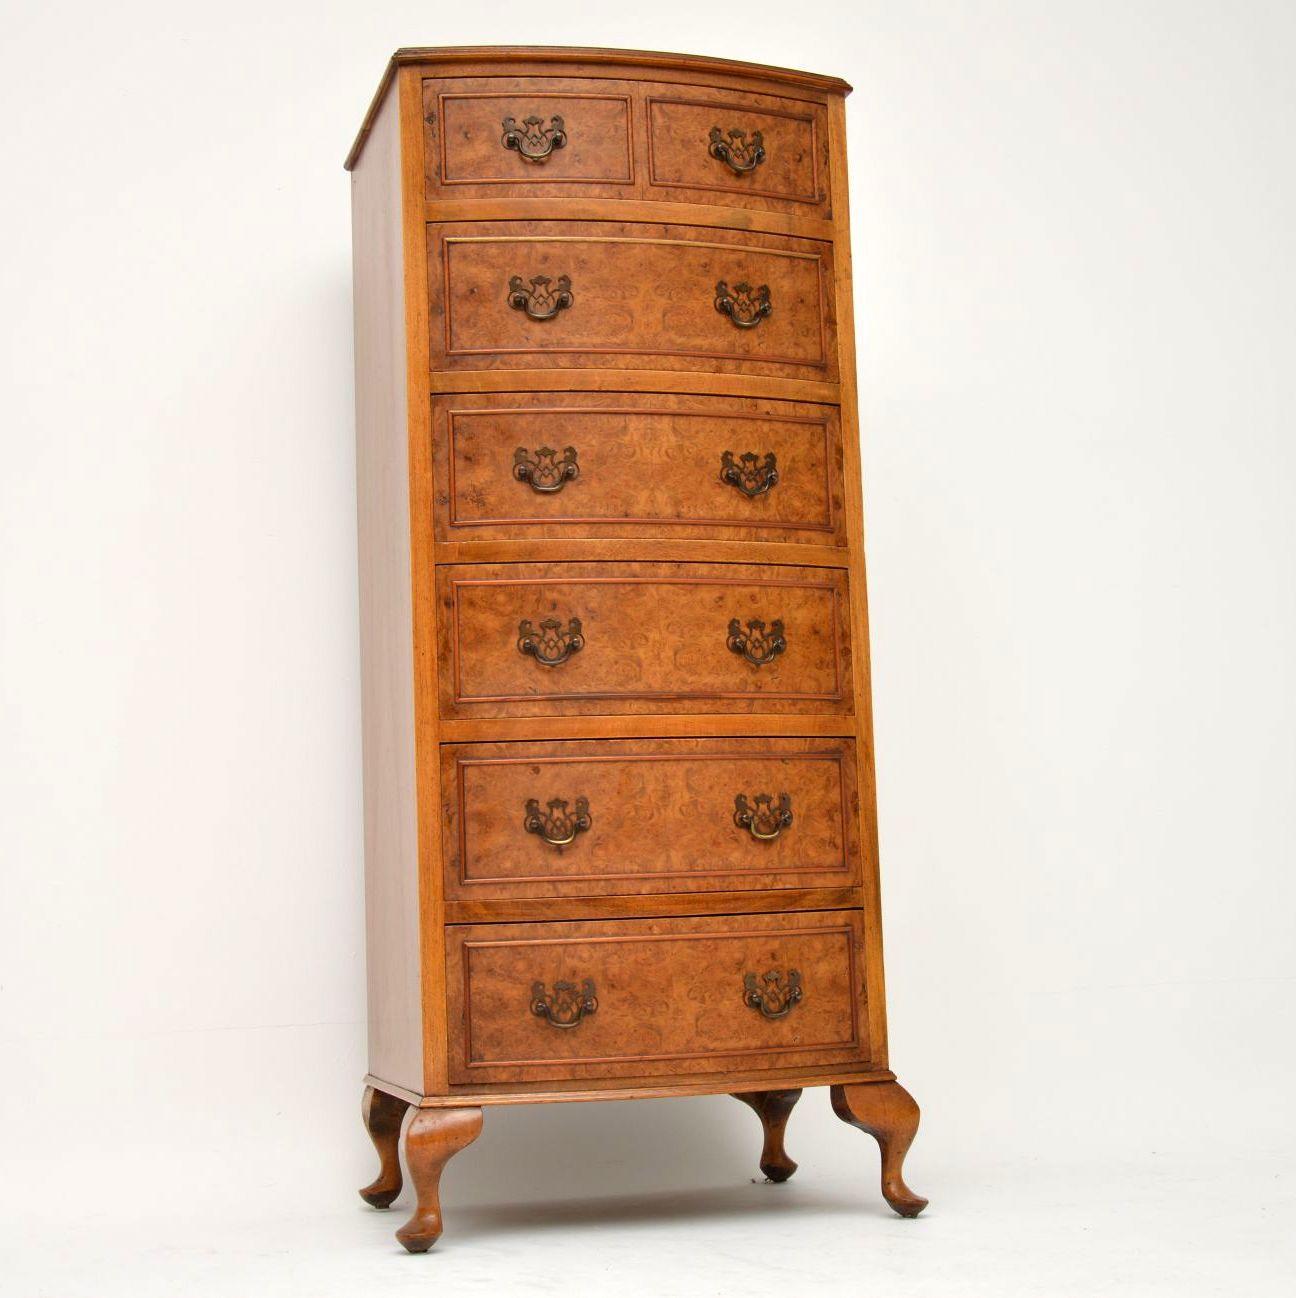 Slim antique bow fronted chest of drawers with a tight burr walnut top and drawer fronts and figured walnut sides. It has great proportions, plus a lovely color and is in good condition, dating to around the 1930s period. The drawers which are